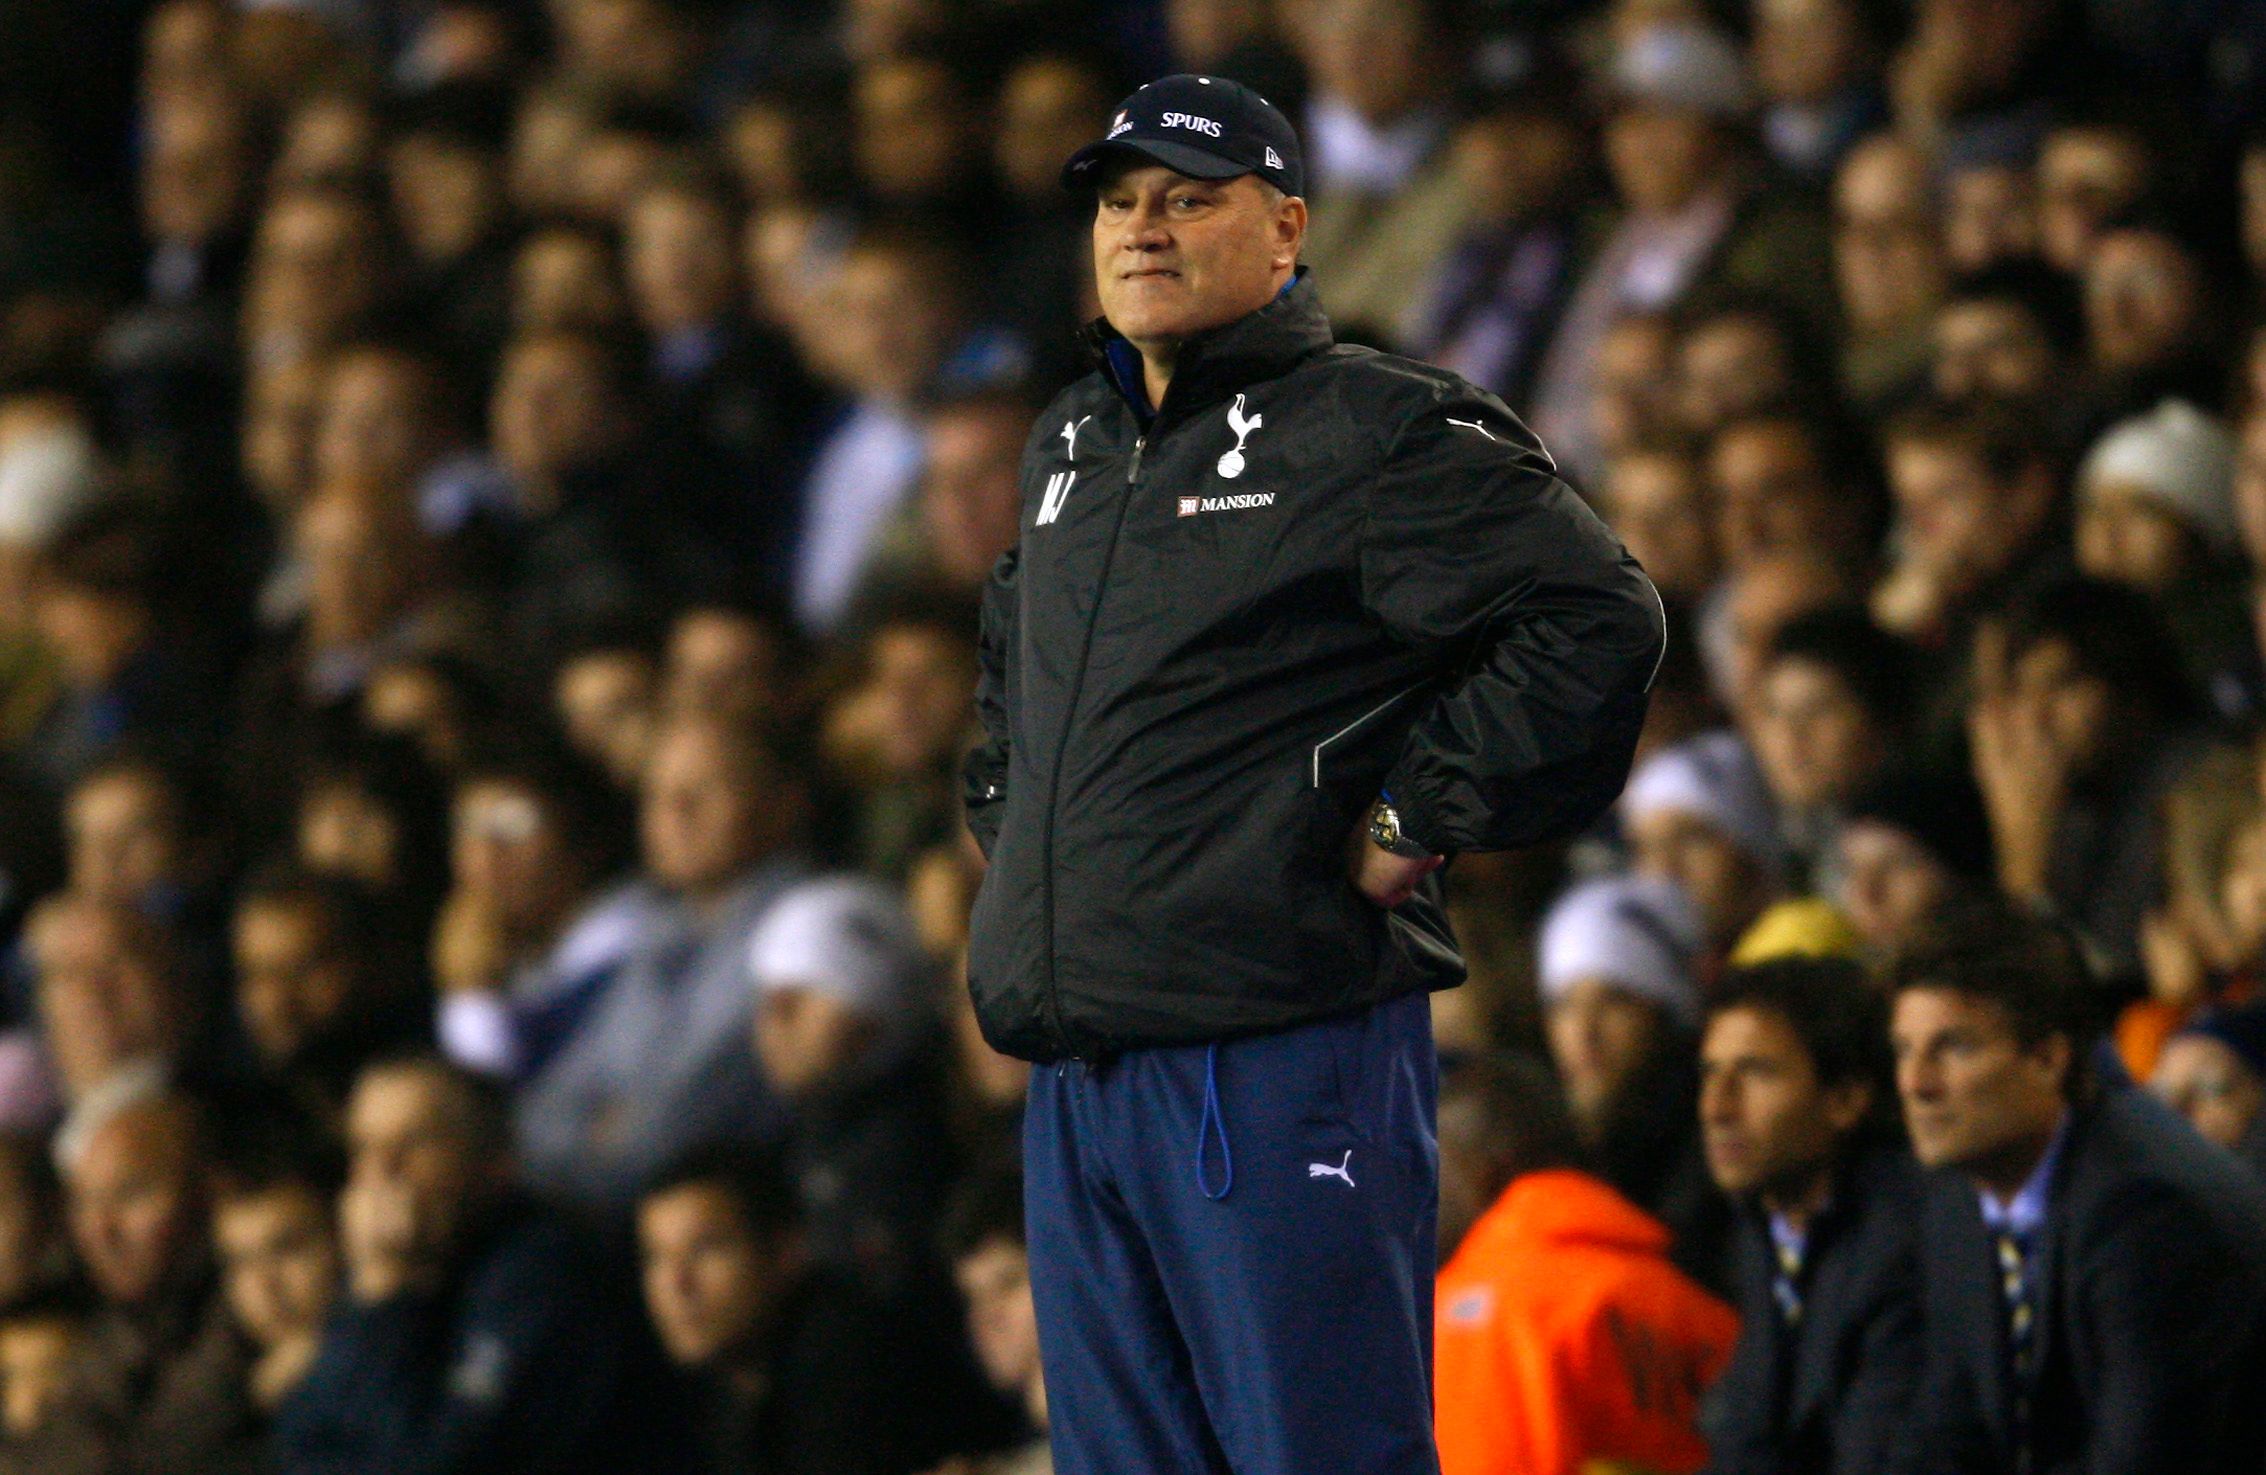 Tottenham Hotspur's coach Martin Jol watches his team play against Getafe during their UEFA Cup Group G soccer match at White Hart Lane in London October 25, 2007.   REUTERS/Dylan Martinez     (BRITAIN)